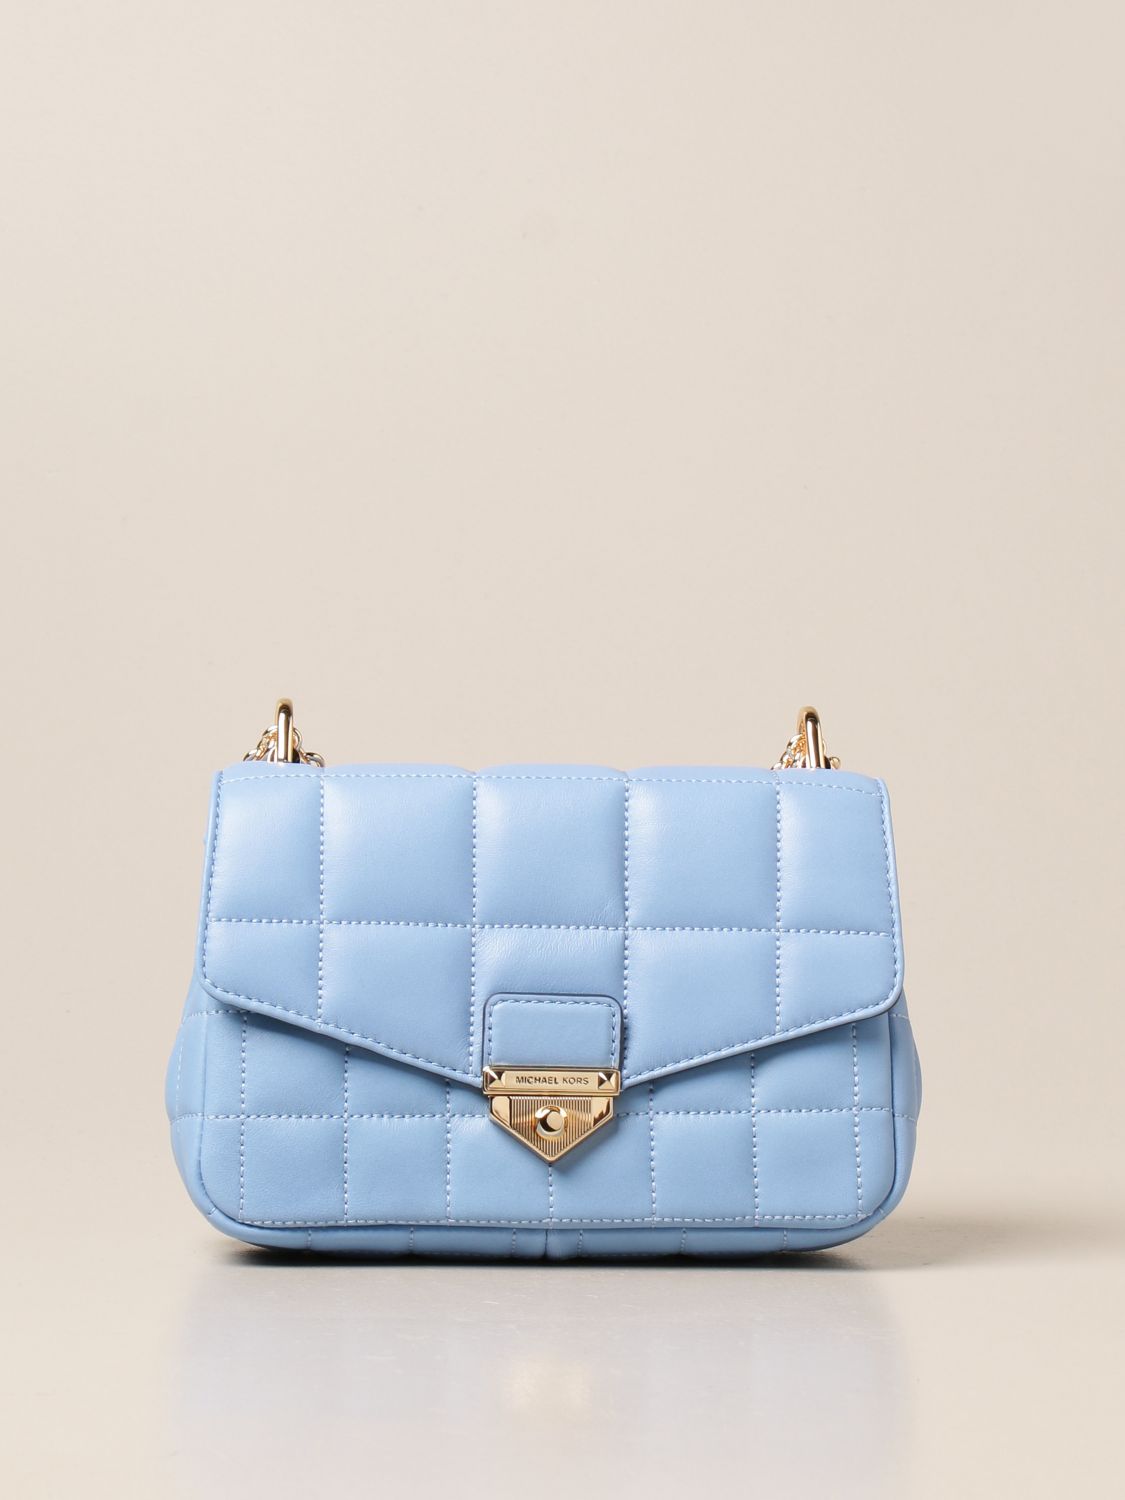 MICHAEL KORS: Soho Michael bag in quilted leather - Blue | Michael Kors  crossbody bags 30H0G1SL1T online on 